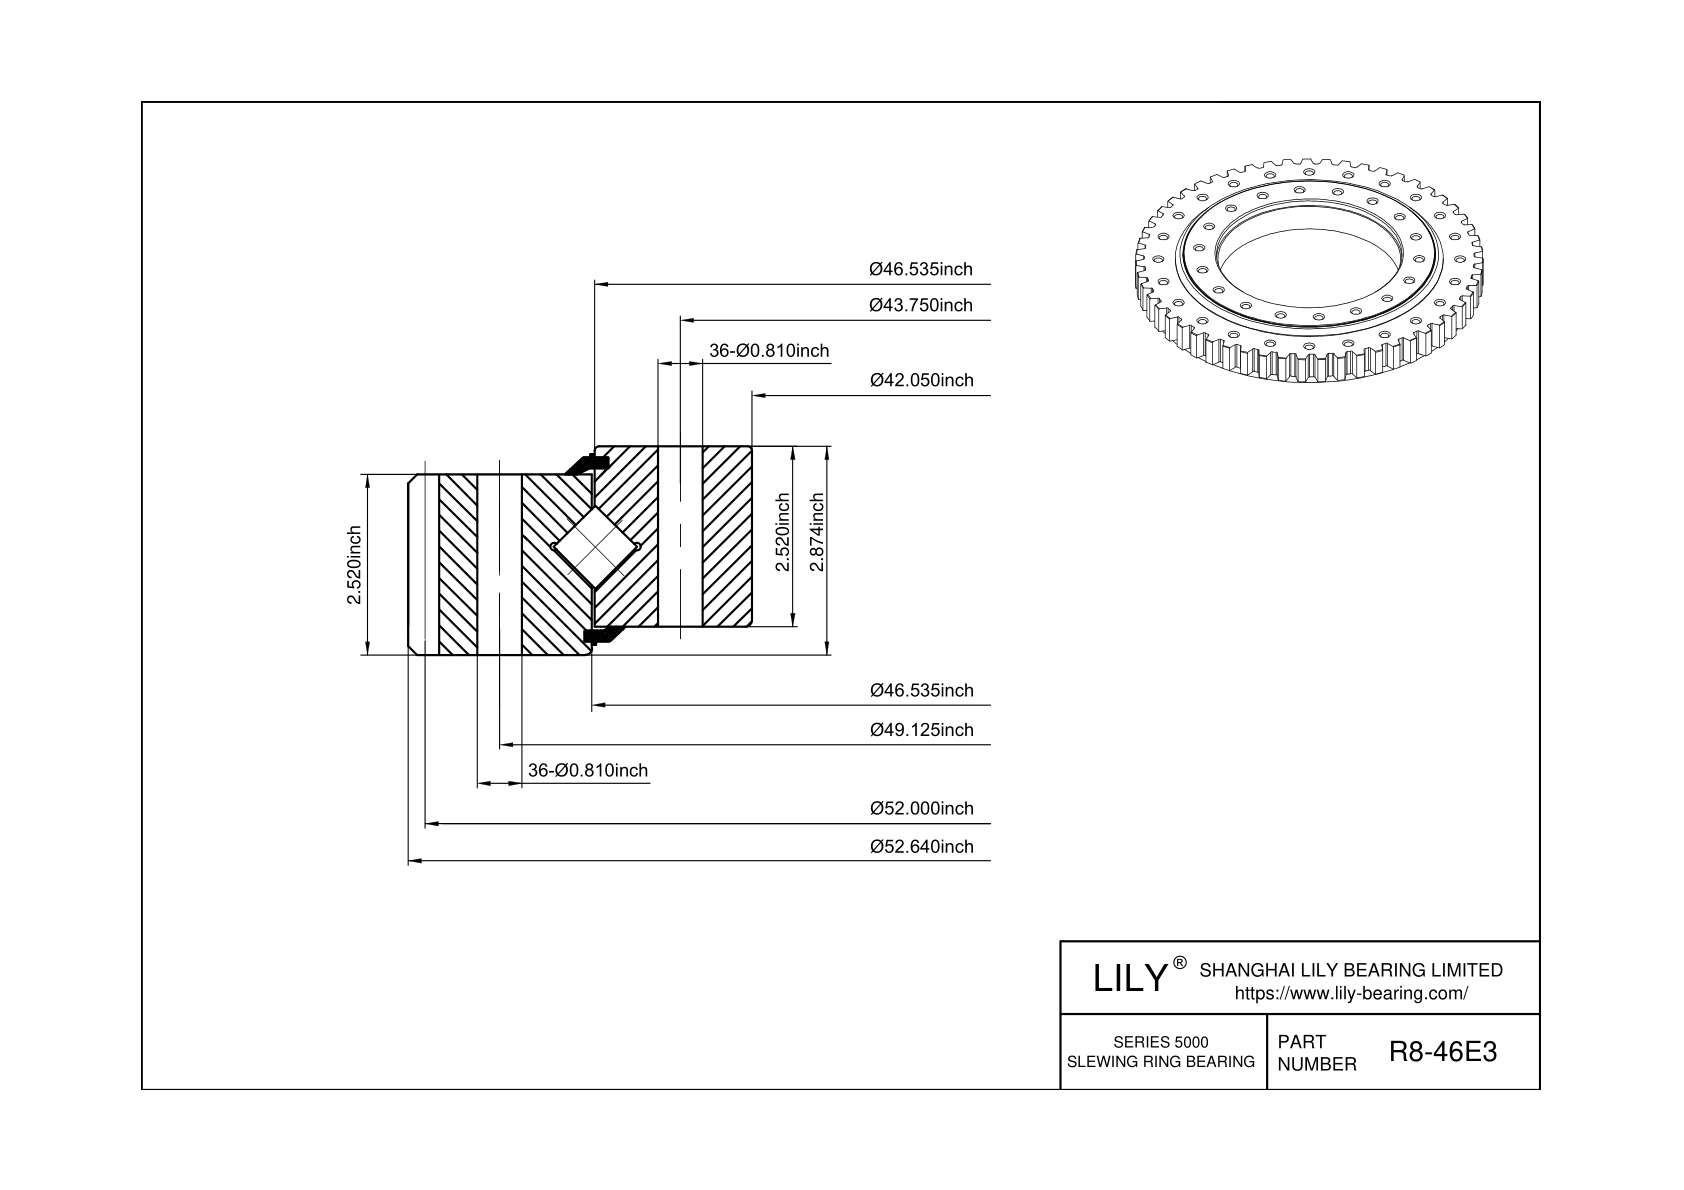 R8-46E3 Cross Roller Slewing Ring Bearing cad drawing